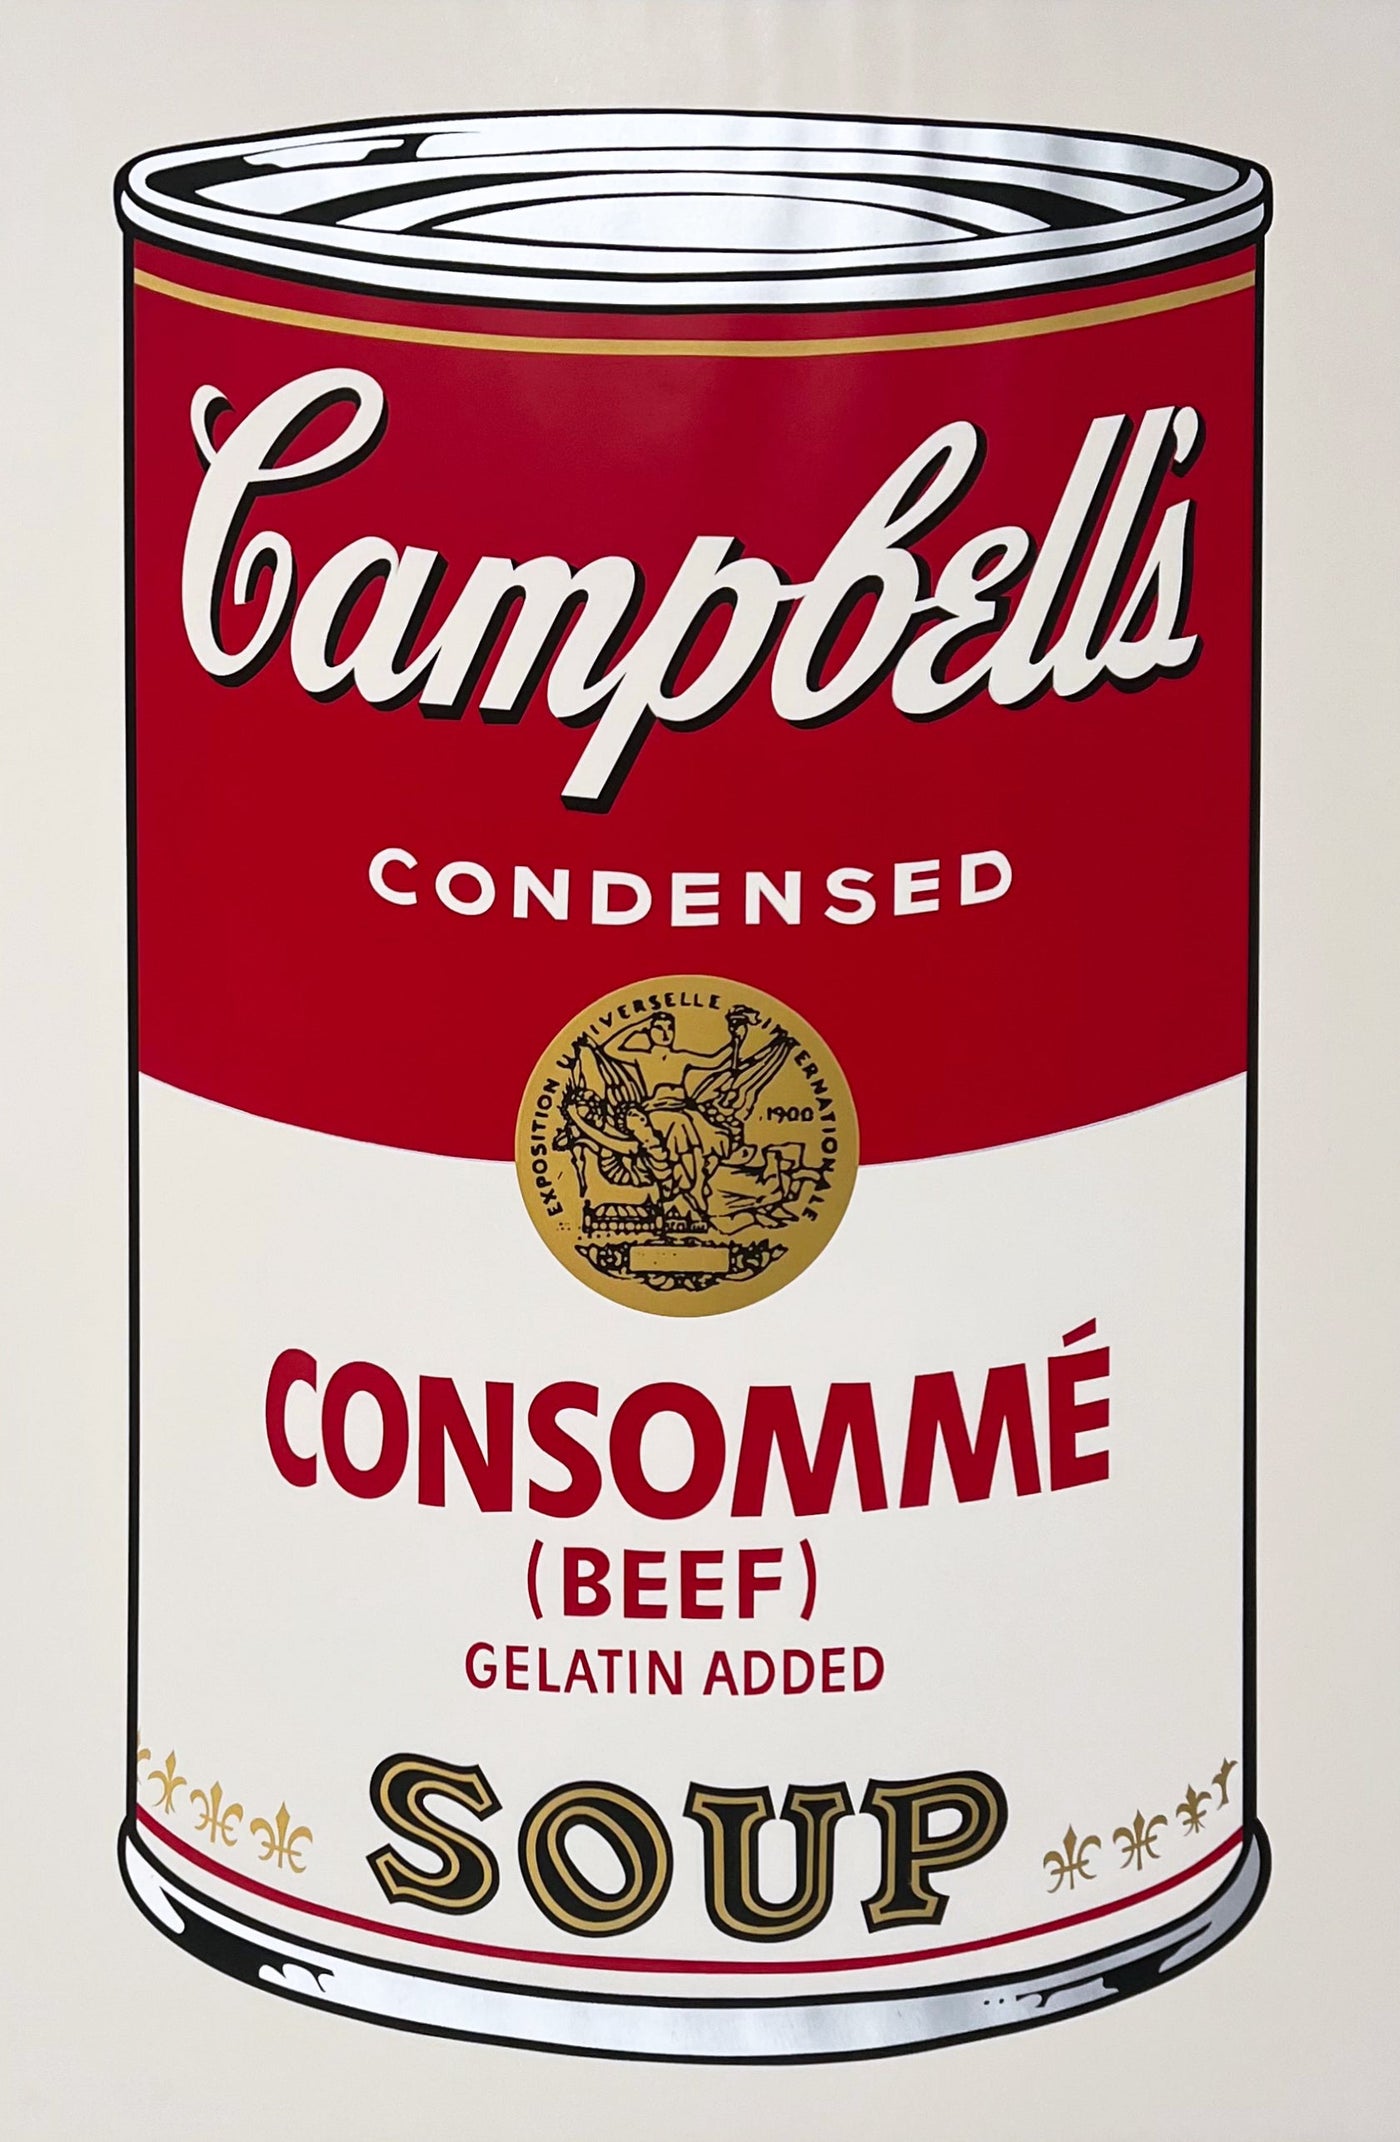 Sunday B. Morning (after Andy Warhol) Consommé (Beef)